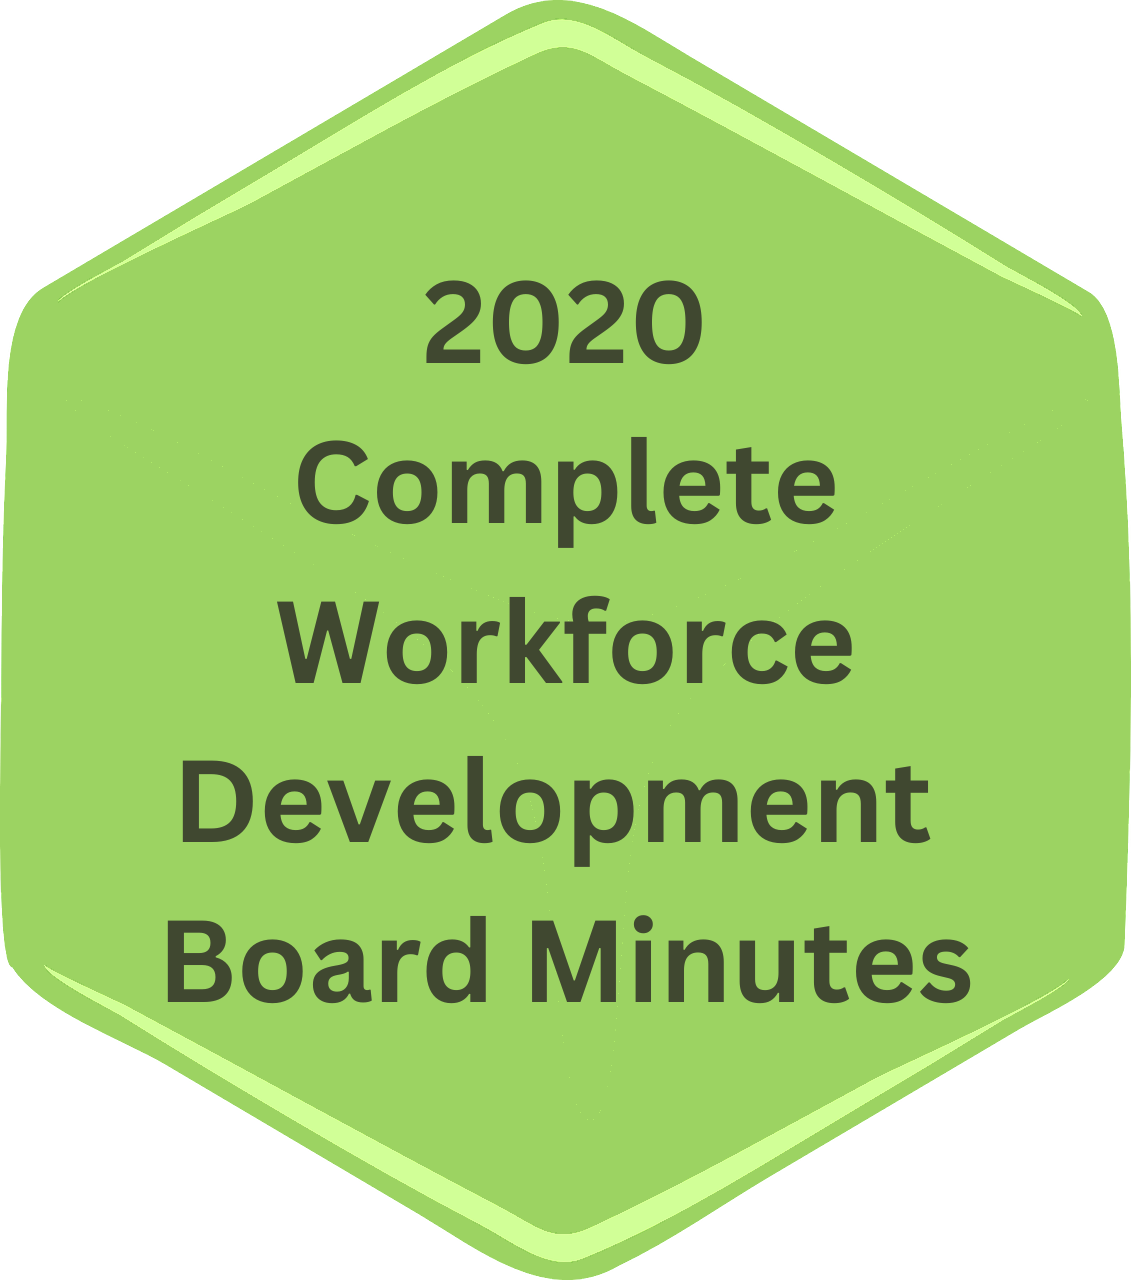 Workforce%20Development%20Board%20Meeting%20Minutes%20BUTTON%20(2).png